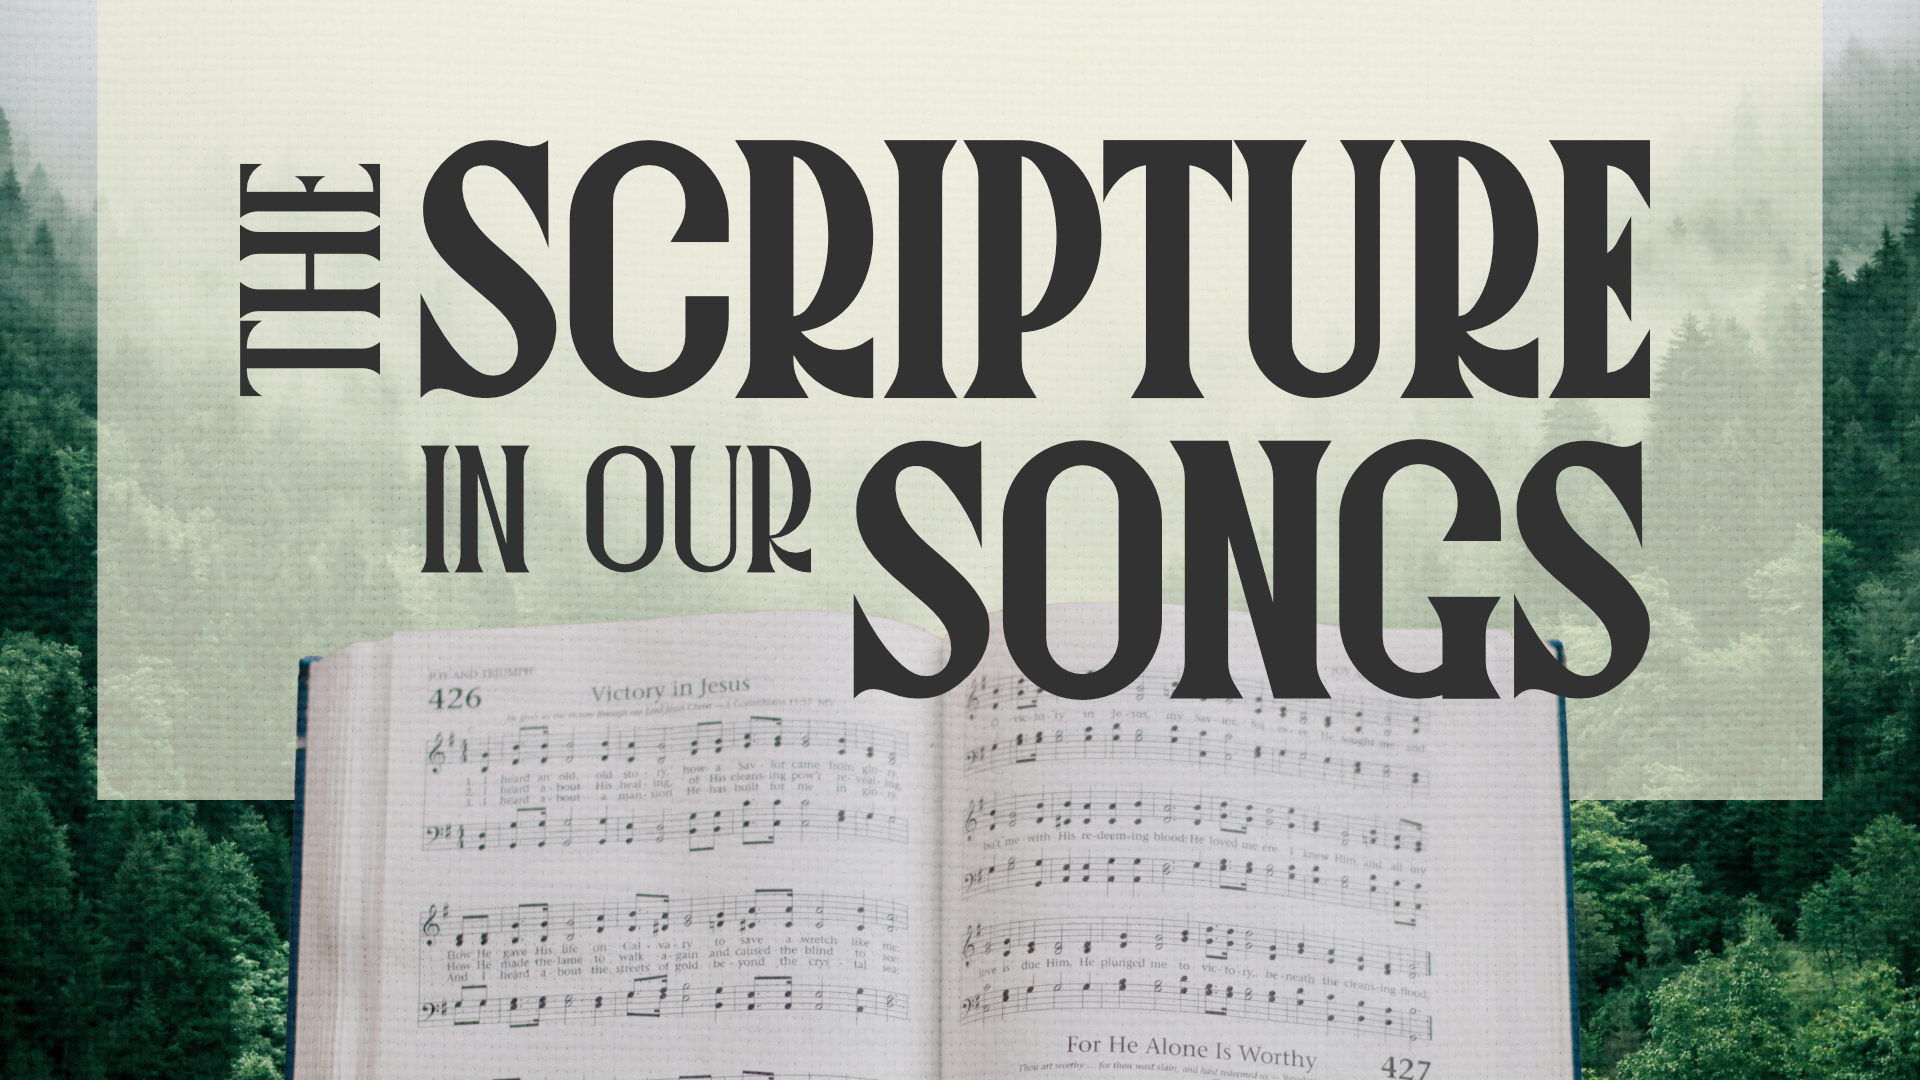 The Scripture In Our Songs